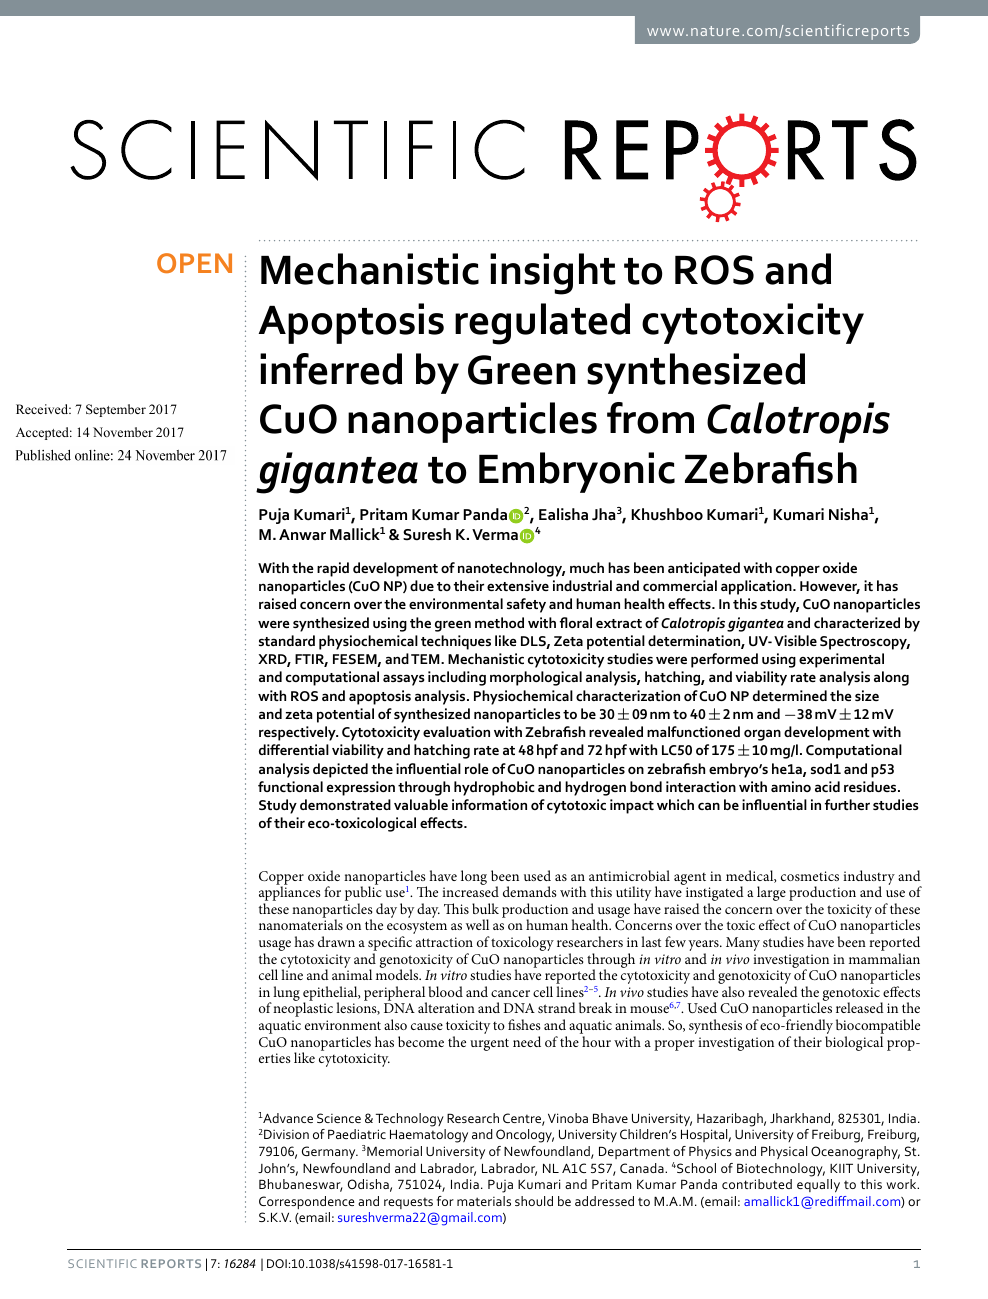 Mechanistic Insight To Ros And Apoptosis Regulated Cytotoxicity